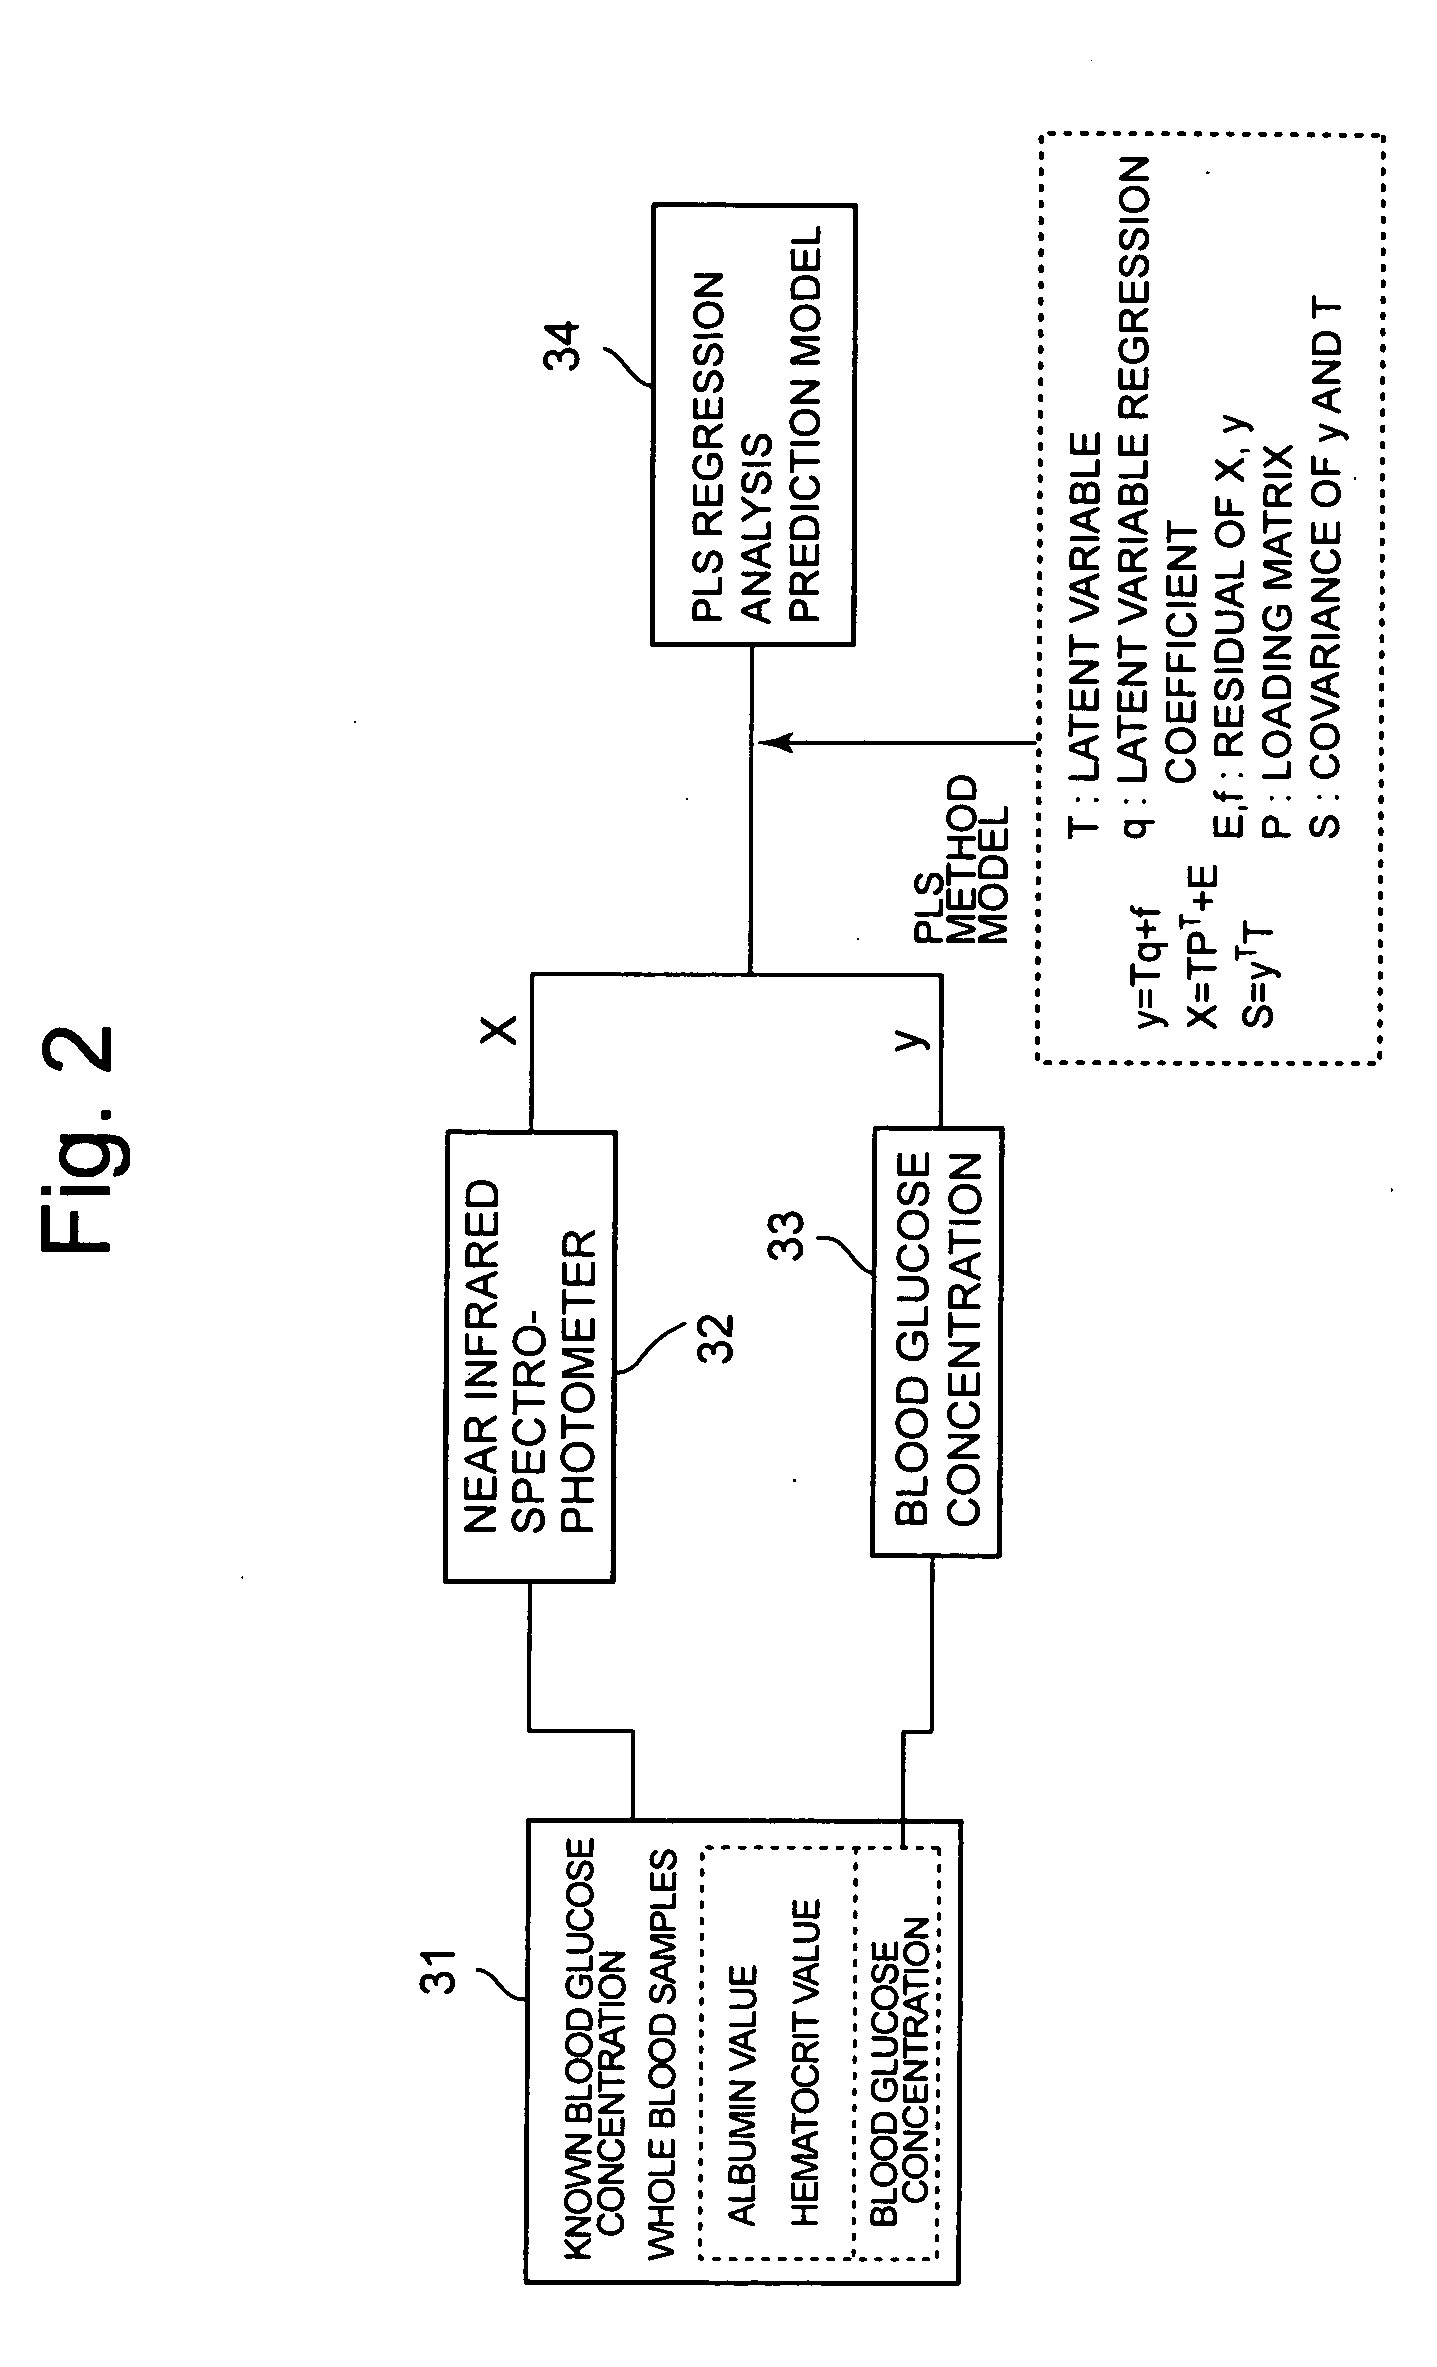 Non-invasive blood component value measuring instrument and method